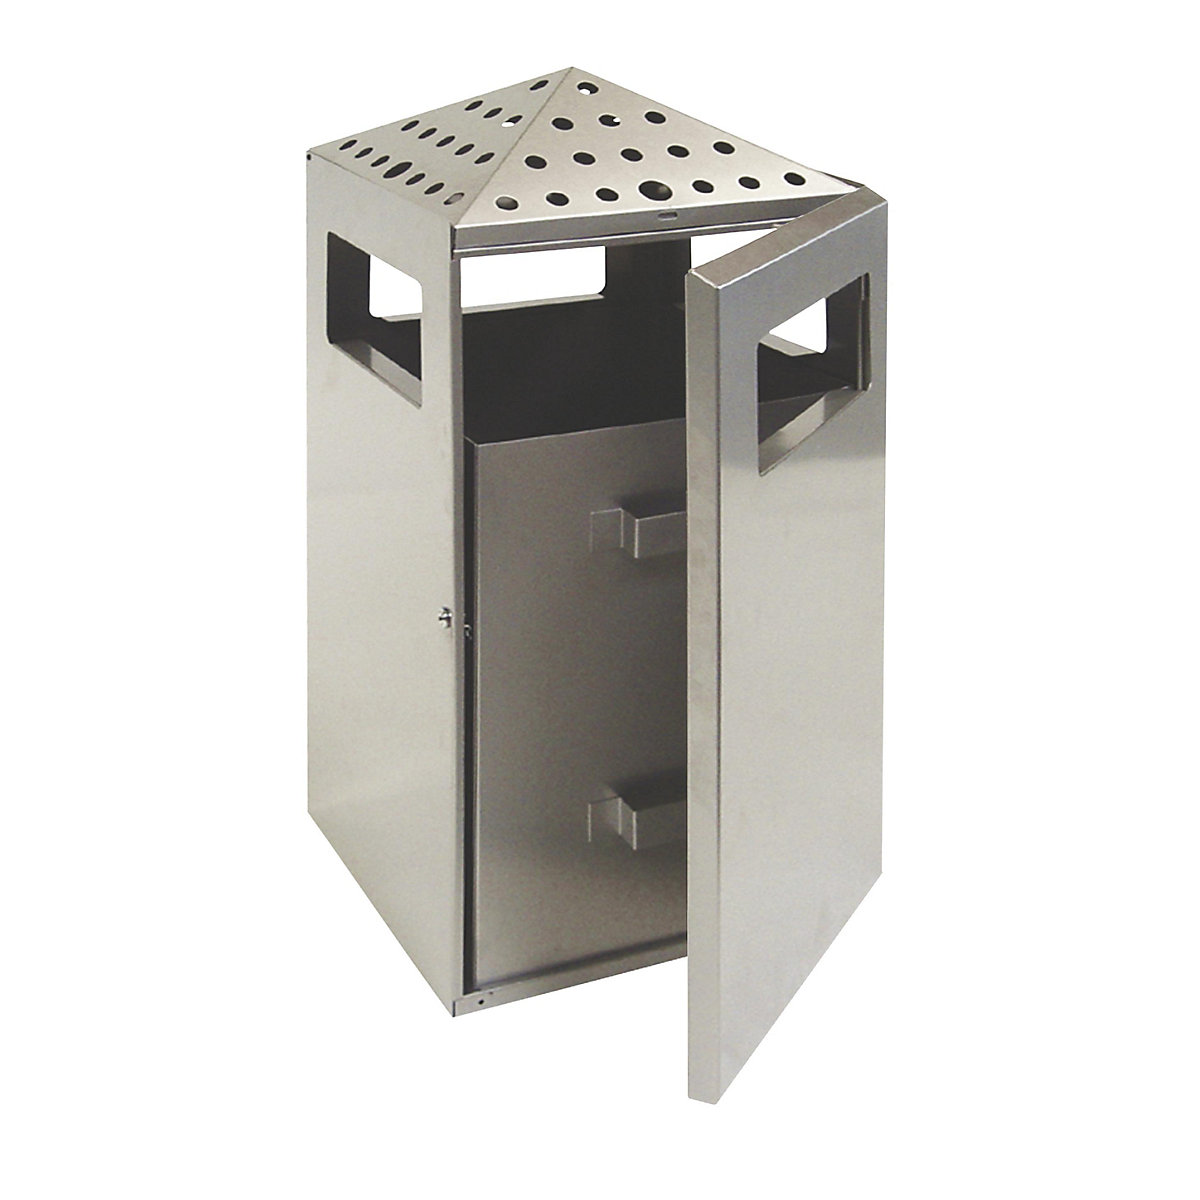 Combination ashtray, capacity 75 l, WxHxD 396 x 919 x 425 mm, stainless steel